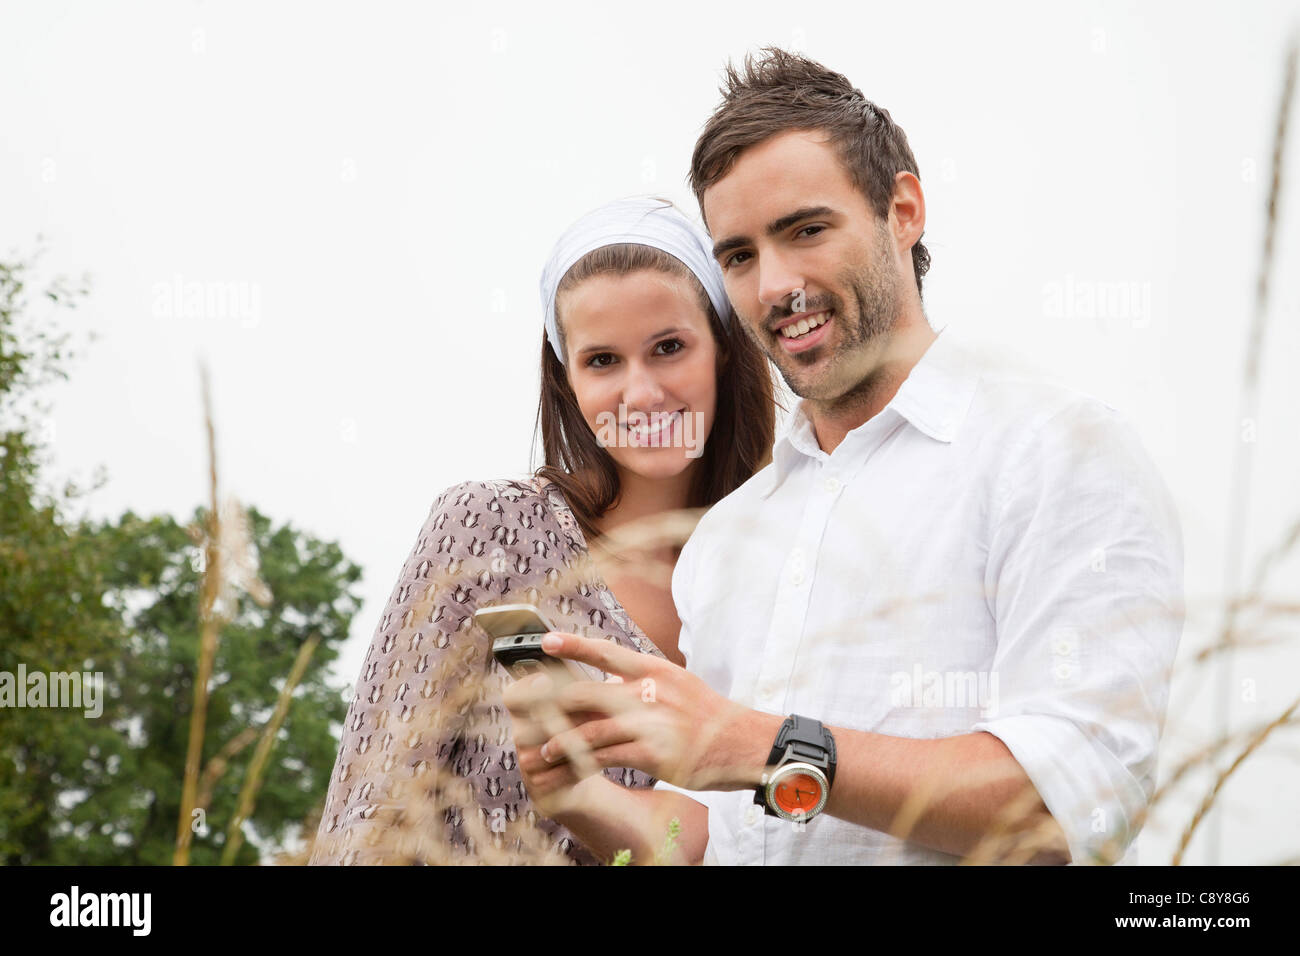 Portrait of young couple reading message on mobile phone Banque D'Images